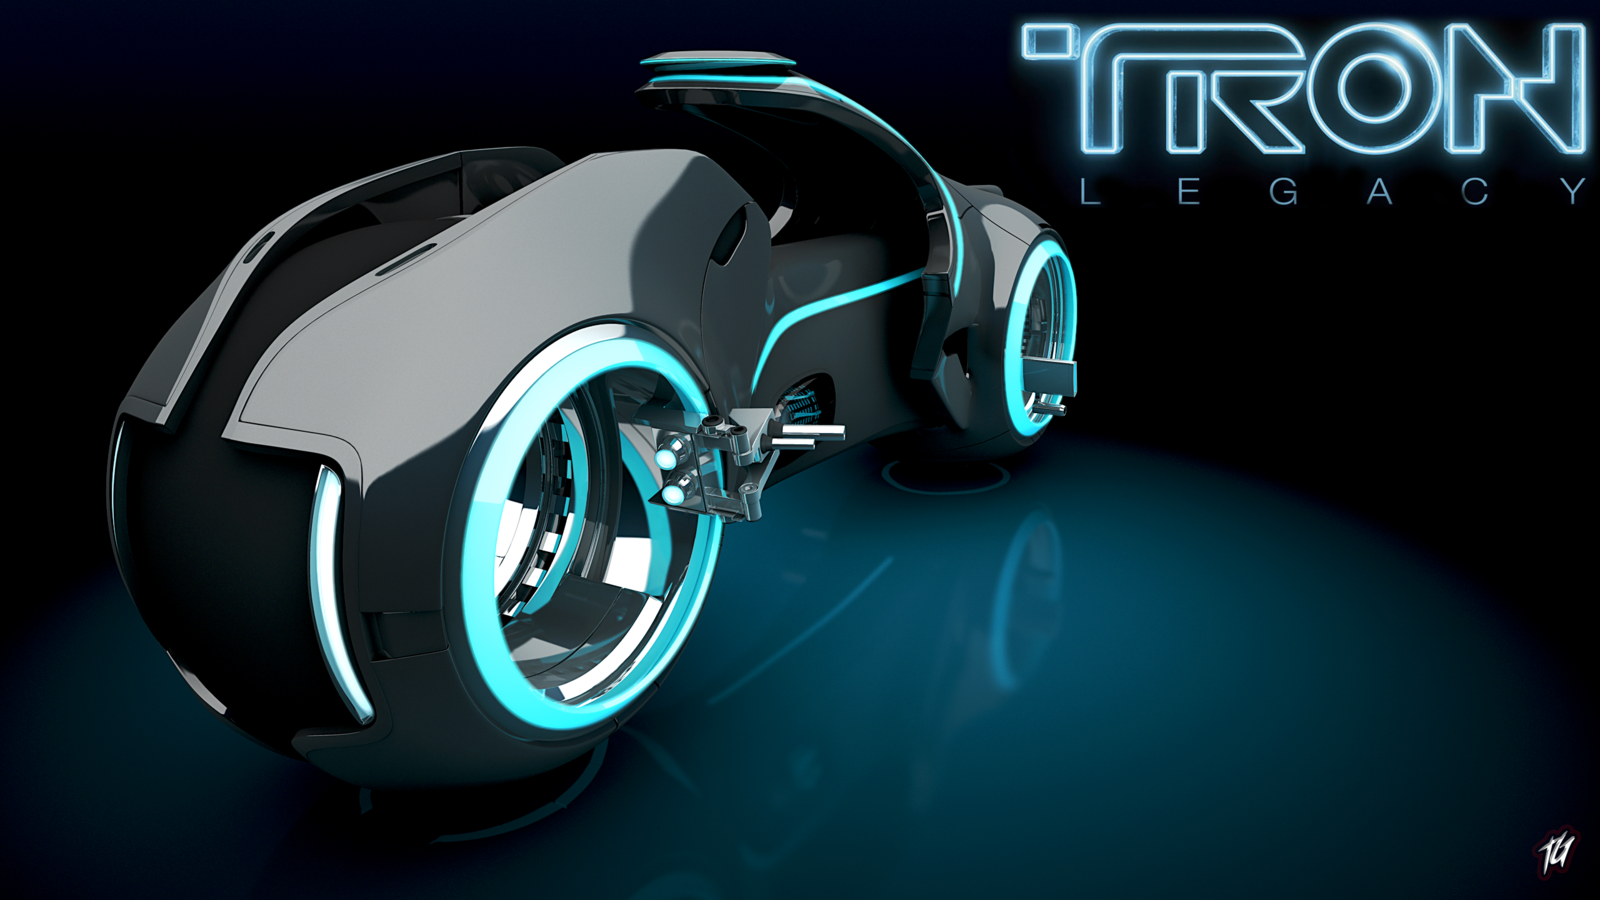 Pins for Tron Motorcycle Wallpaper from Pinterest